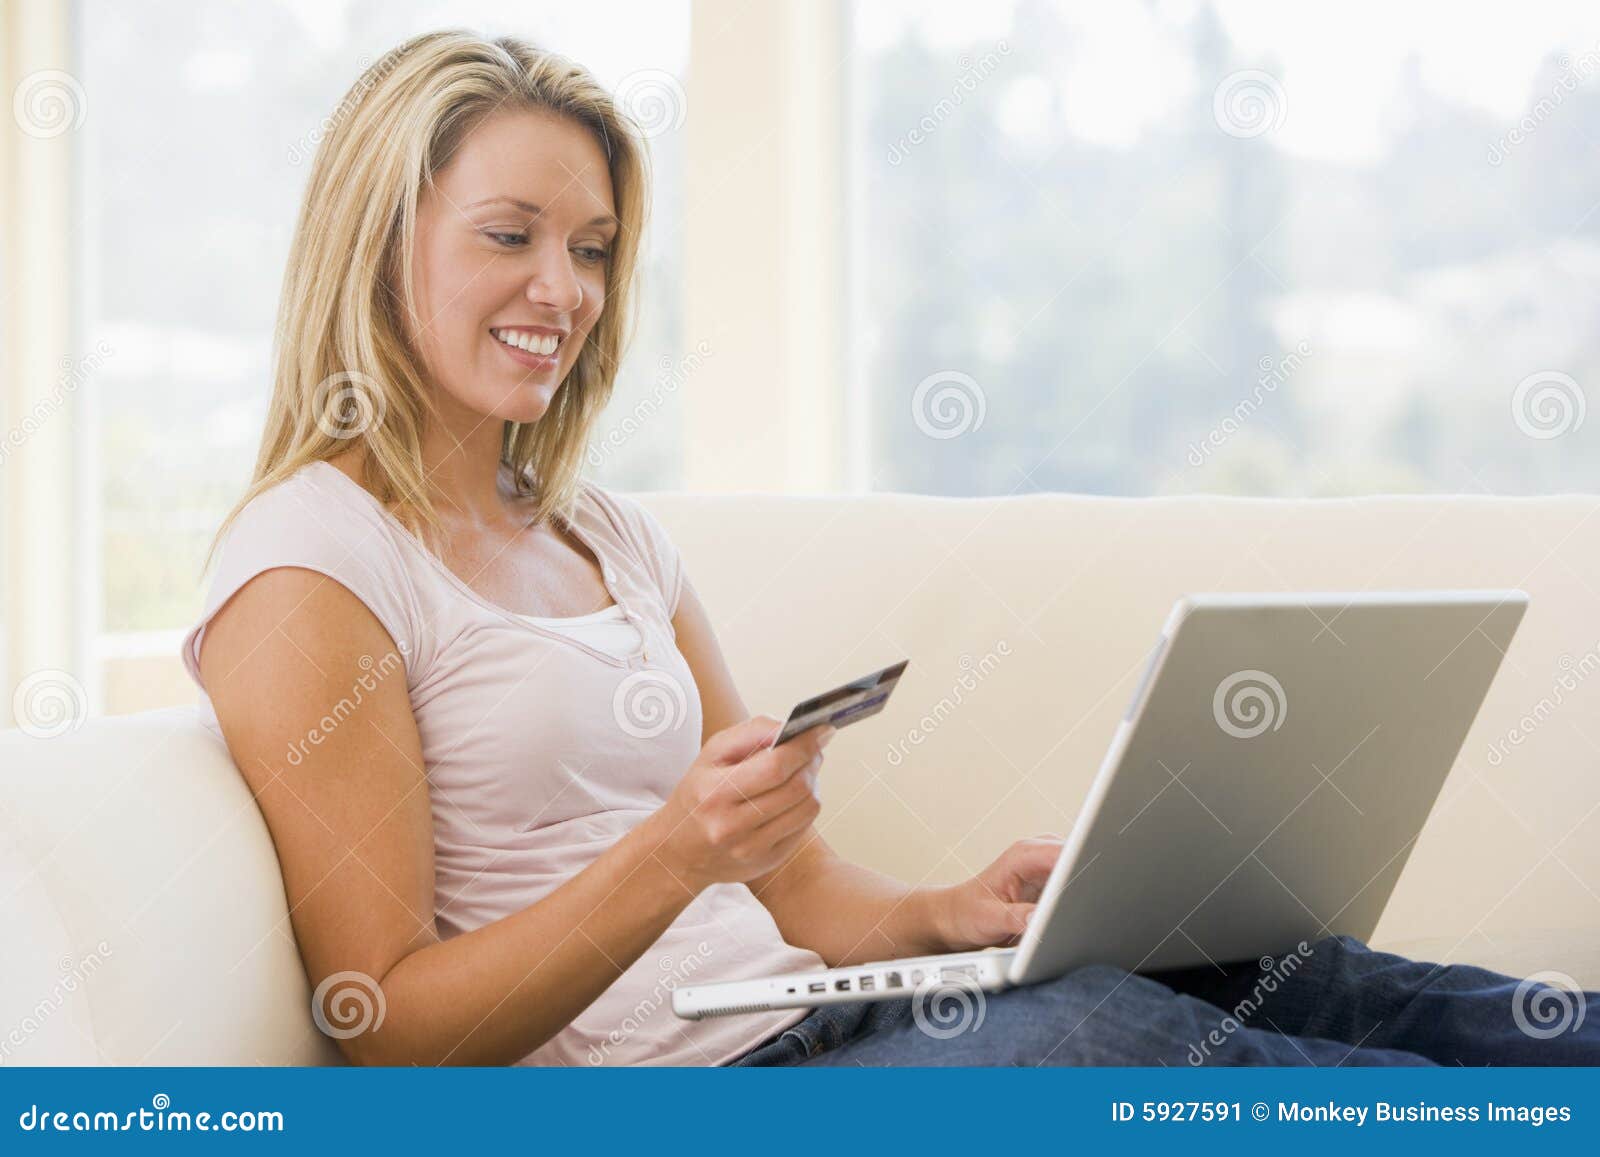 Woman in Living Room Using Laptop Stock Image - Image of finance ...